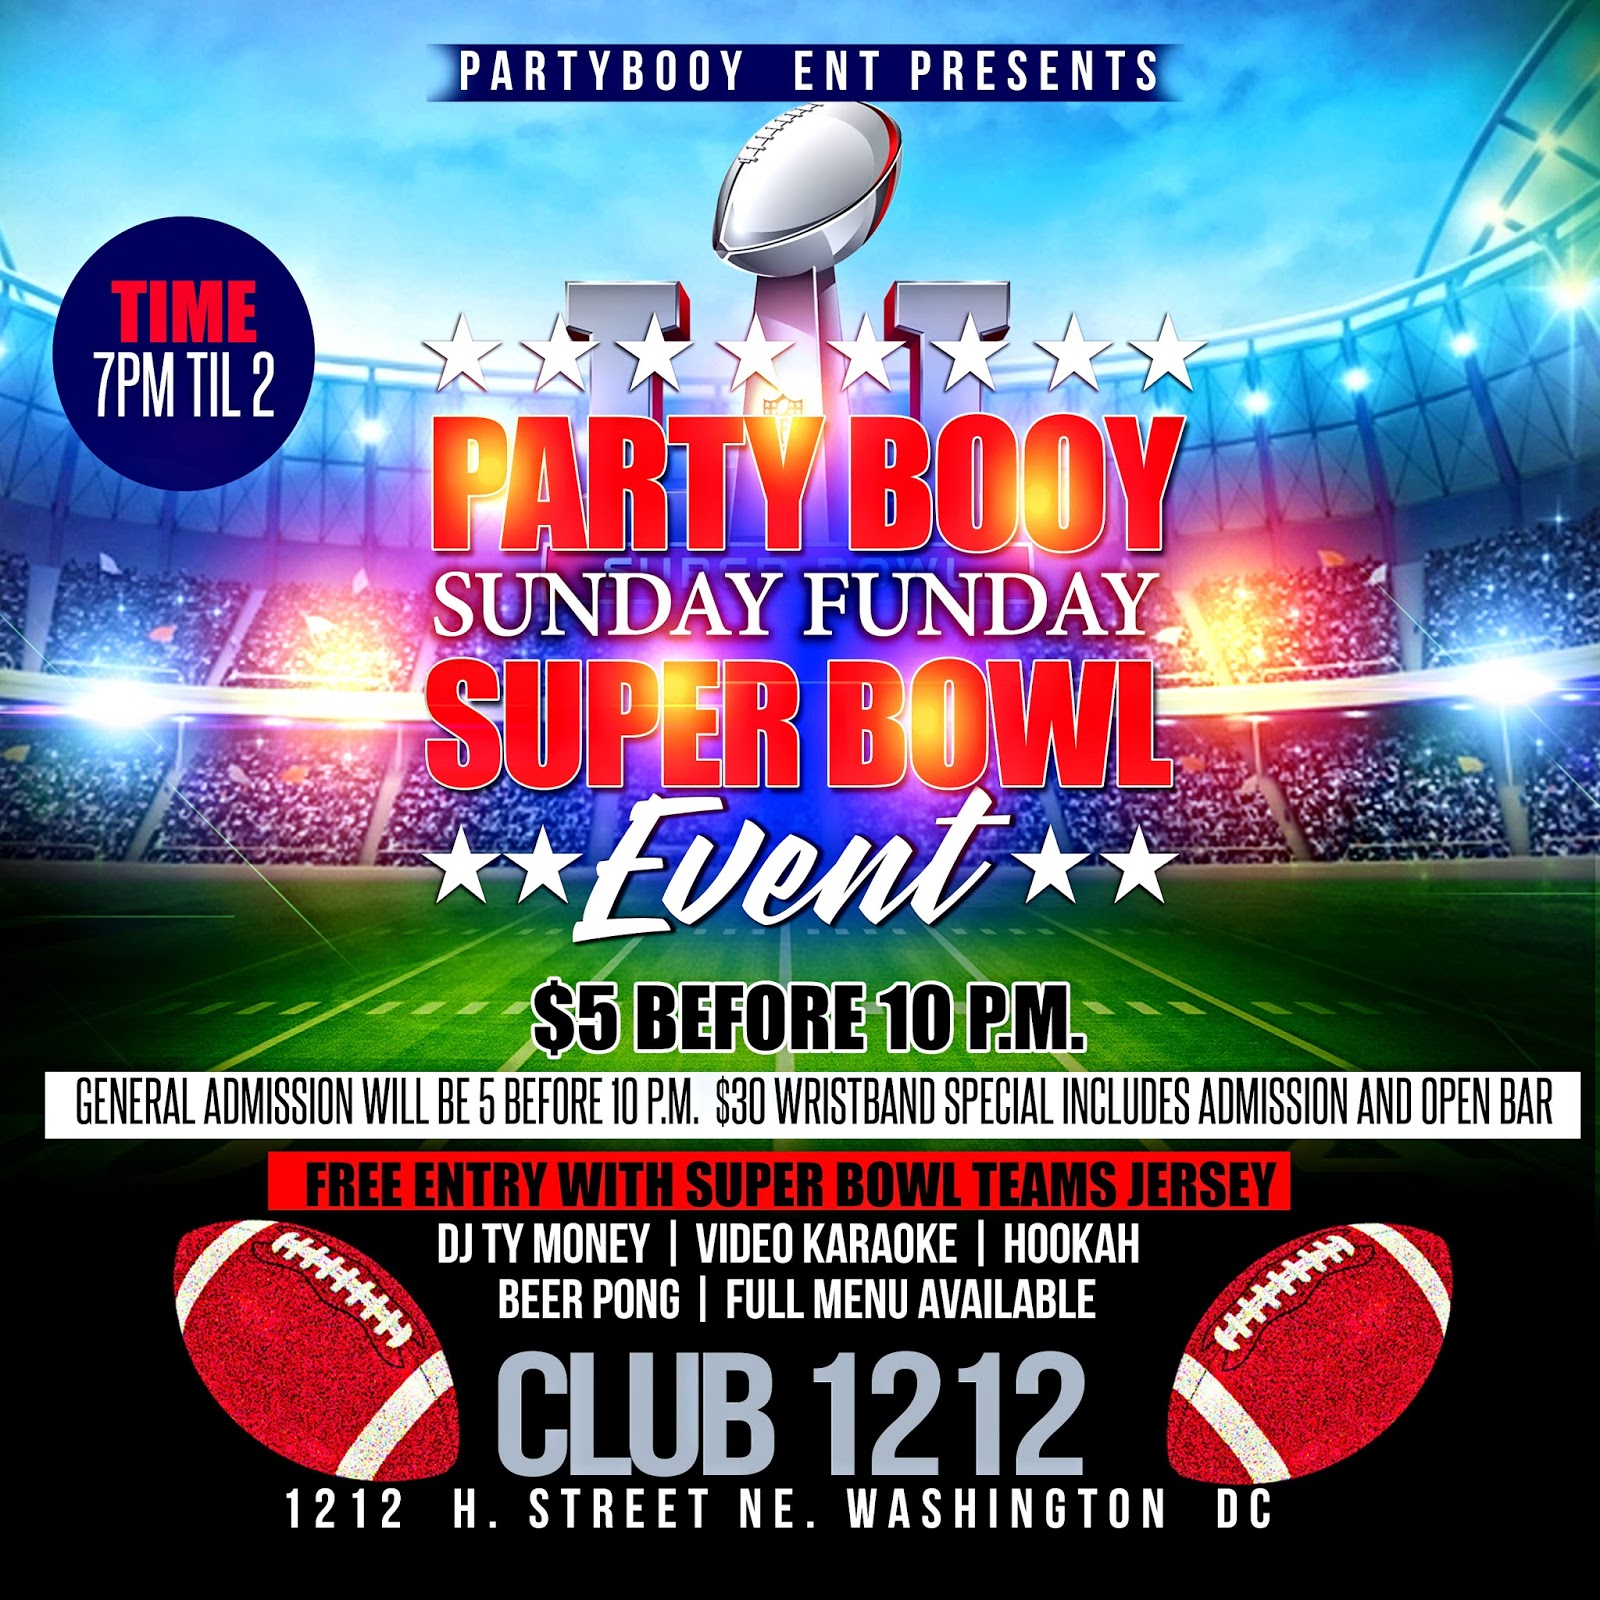 graphicwind creative designs Party Booy Sunday Funday Super Bowl